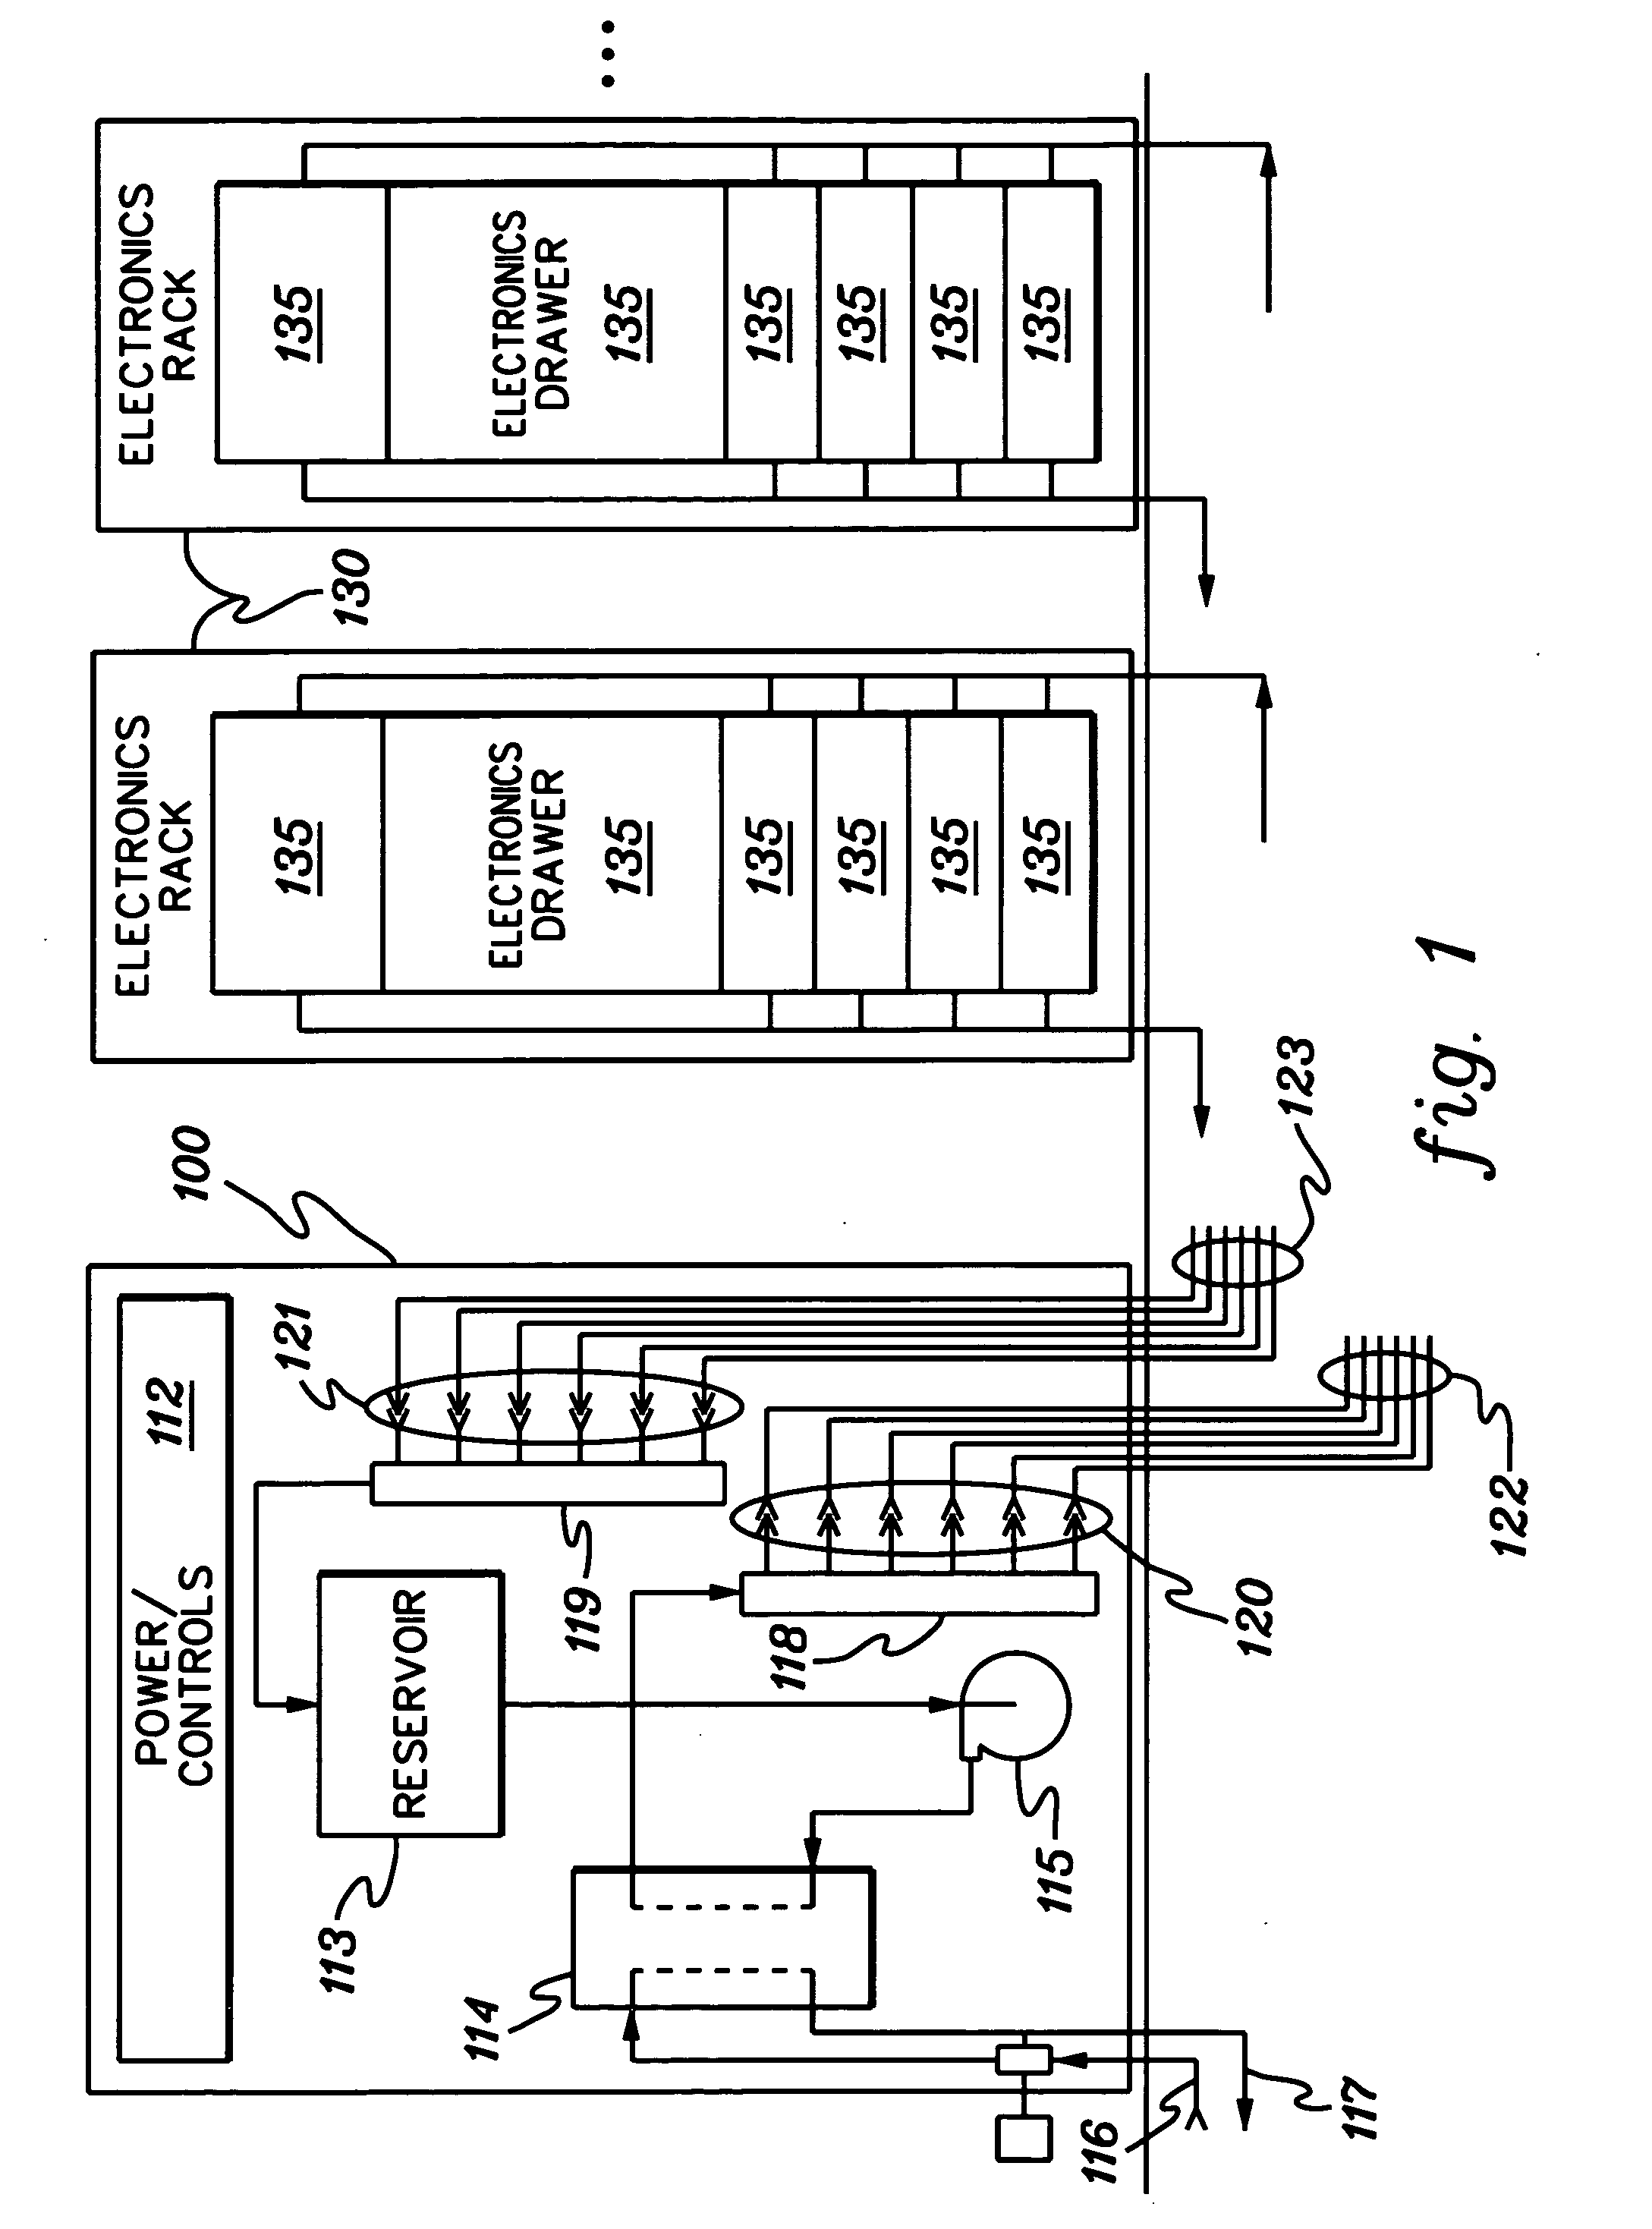 Cold plate apparatus and method of fabrication thereof with a controlled heat transfer characteristic between a metallurgically bonded tube and heat sink for facilitating cooling of an electronics component